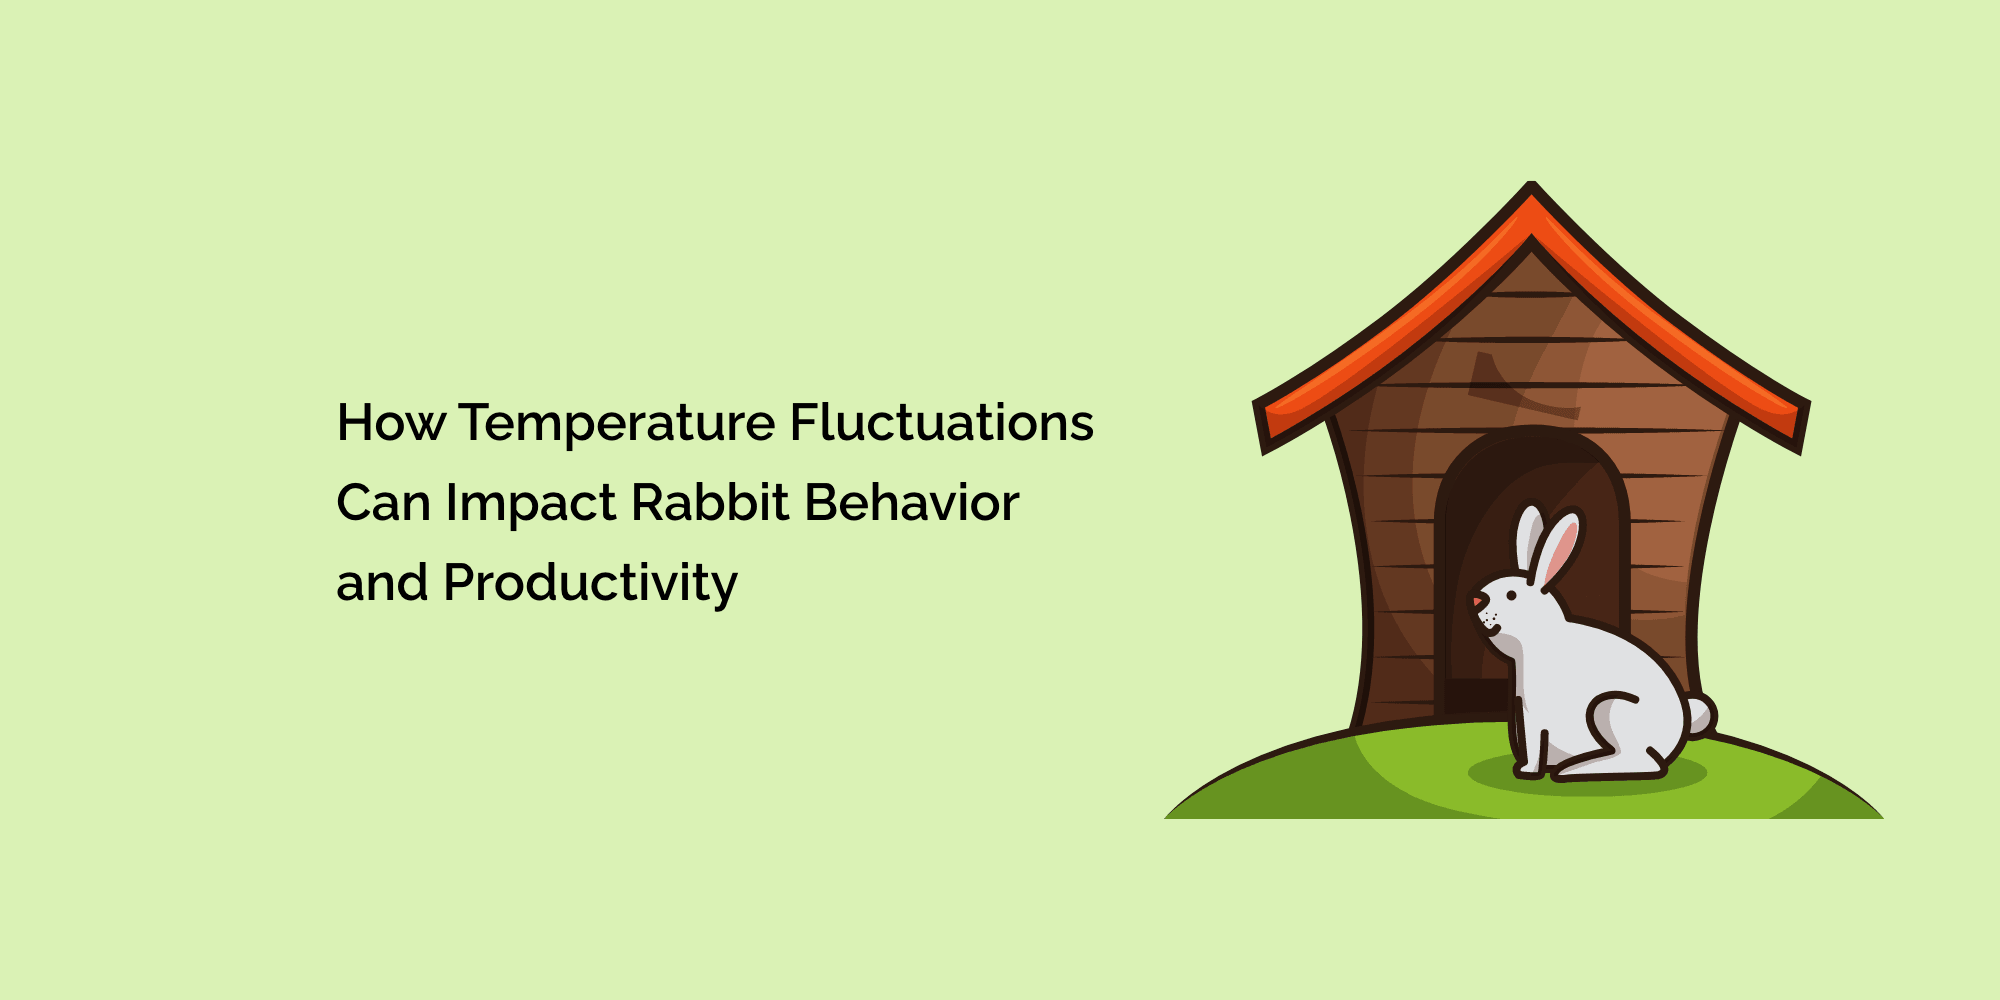 How Temperature Fluctuations Can Impact Rabbit Behavior and Productivity